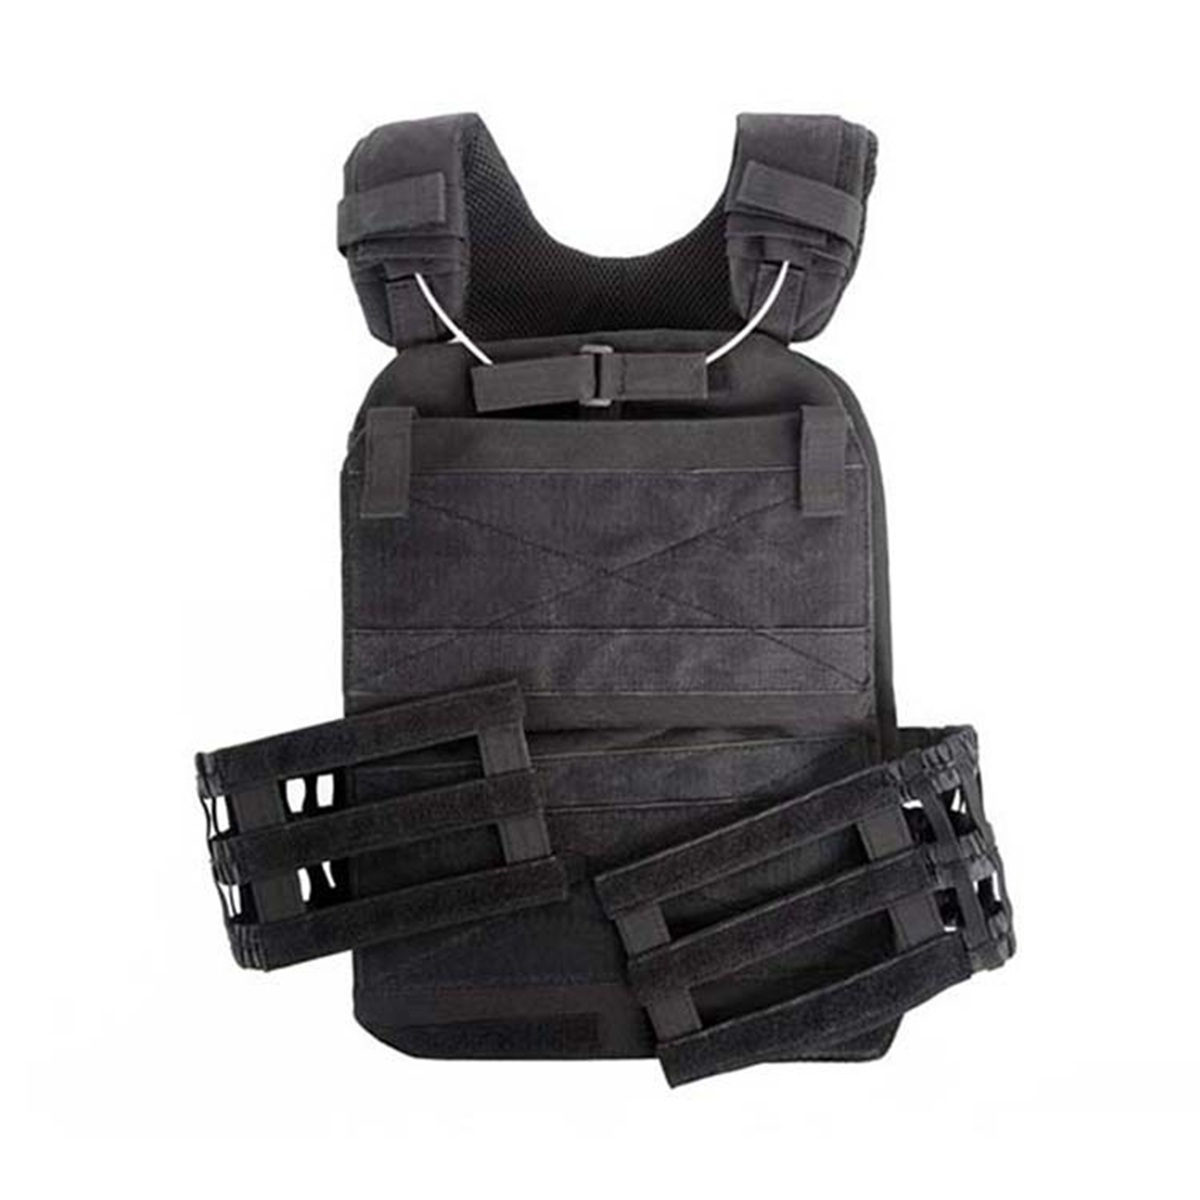 Outdoor-Adult-Tactical-TMC-Molle-Vest--Physical-Training-Sports-Fitness-Oxford-Weight-Waistcoat-1471093-4